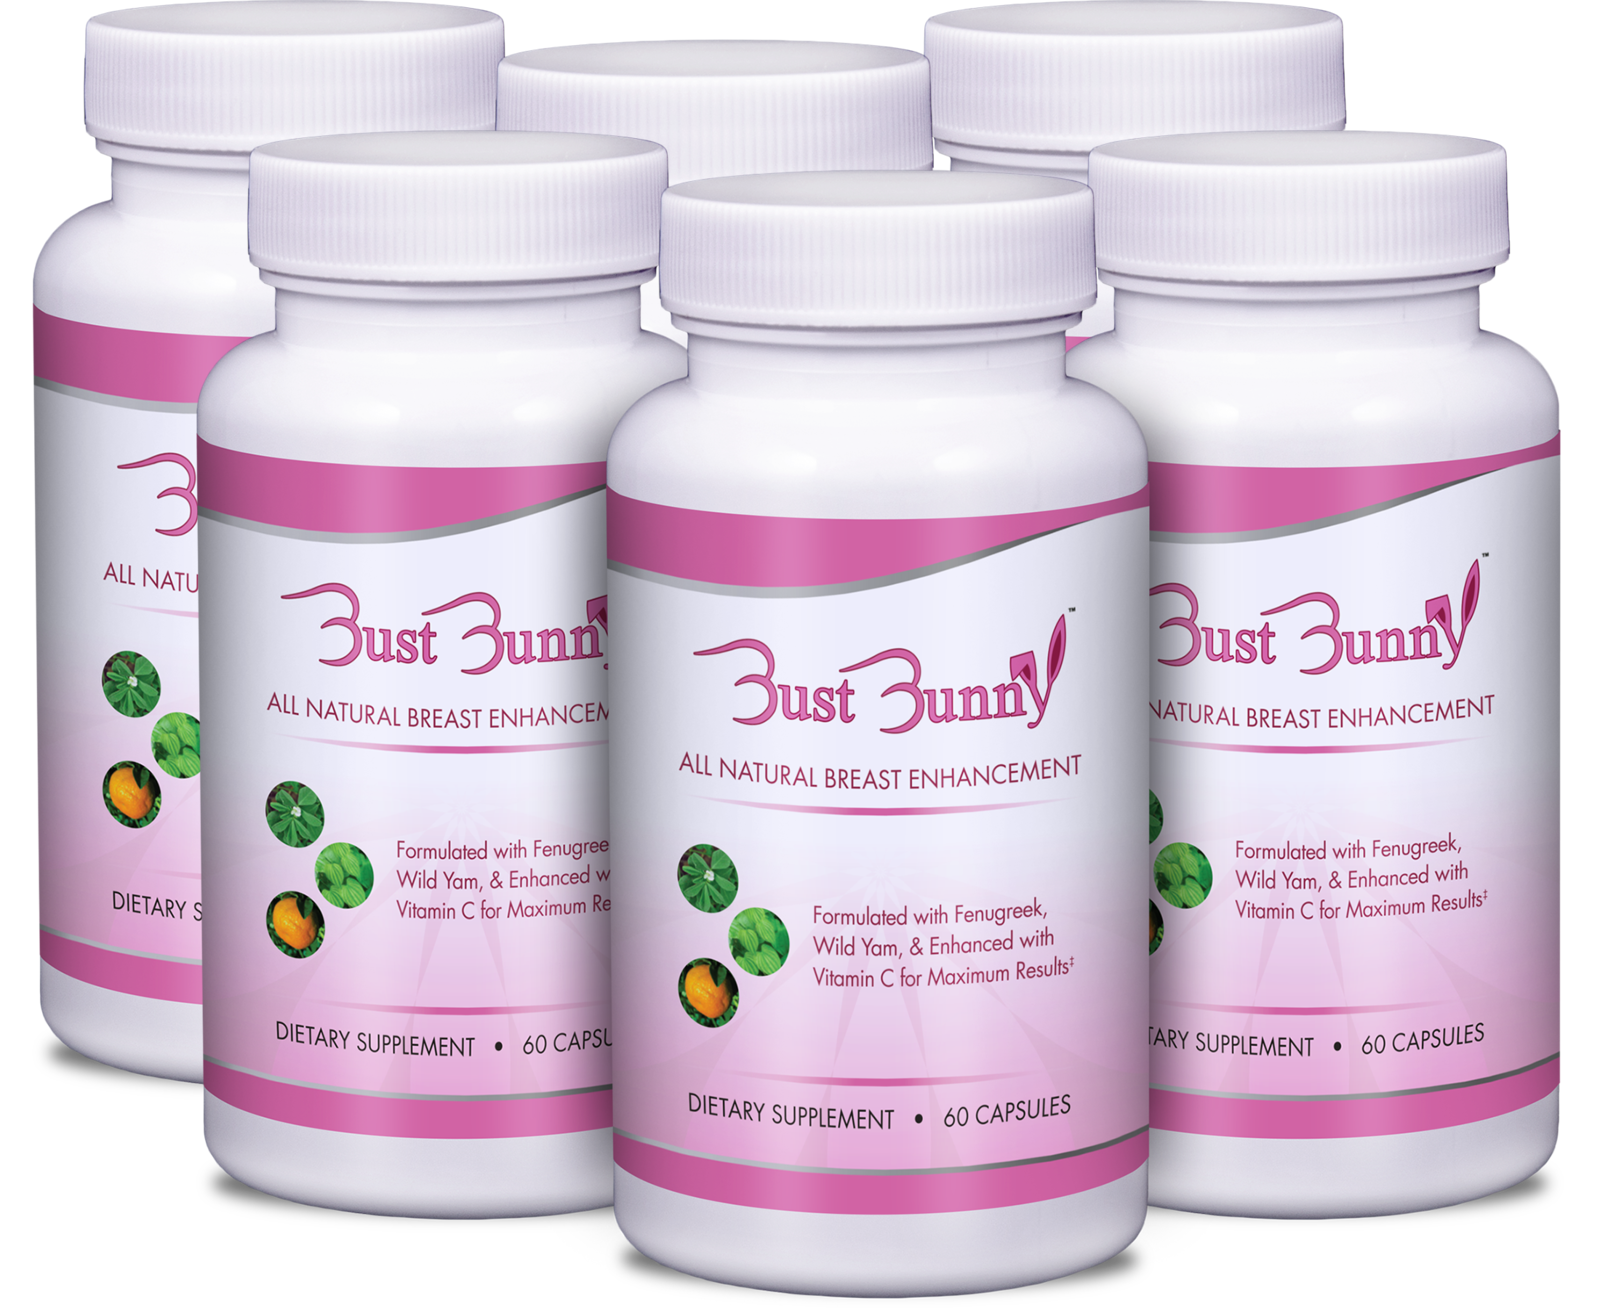 Primary image for 6 Month Supply of Bust Bunny - All Natural Breast Enhancement Pills w/Vitamin C